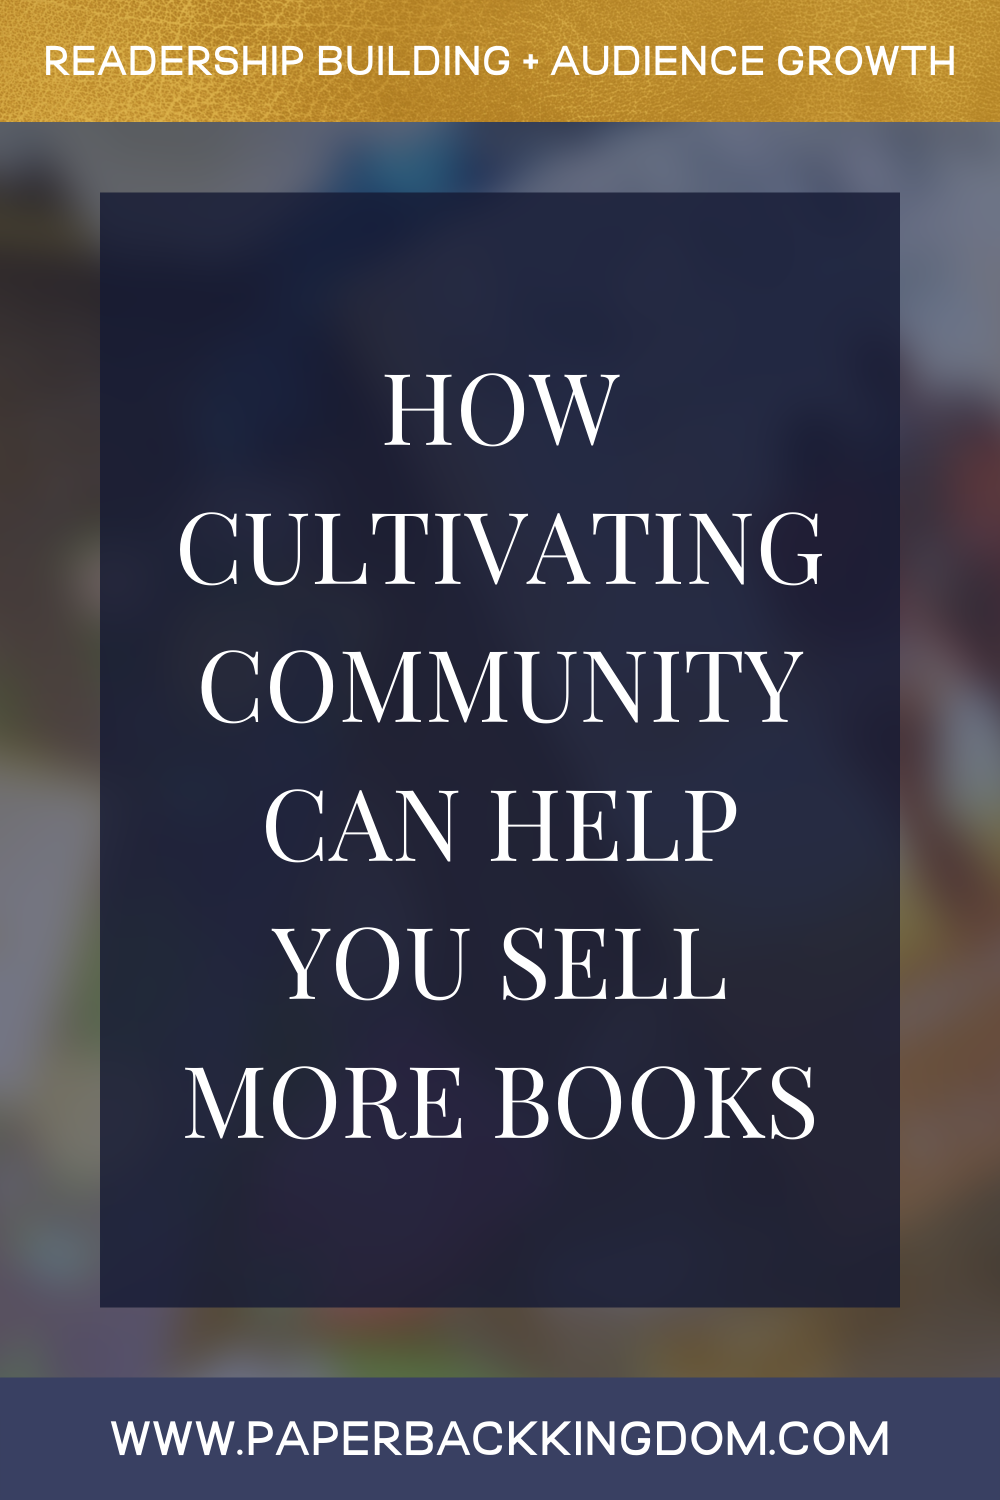 How Cultivating Community Can Help You Sell More Books - Having a community is one of the most undervalued and helpful ways to build your author career— which is why if you're not doing it, you'll want to jump onto this bandwagon, stat! In this post, we’re going to look at some of the many ways having a community can grow our sales, readership, and audience as authors.